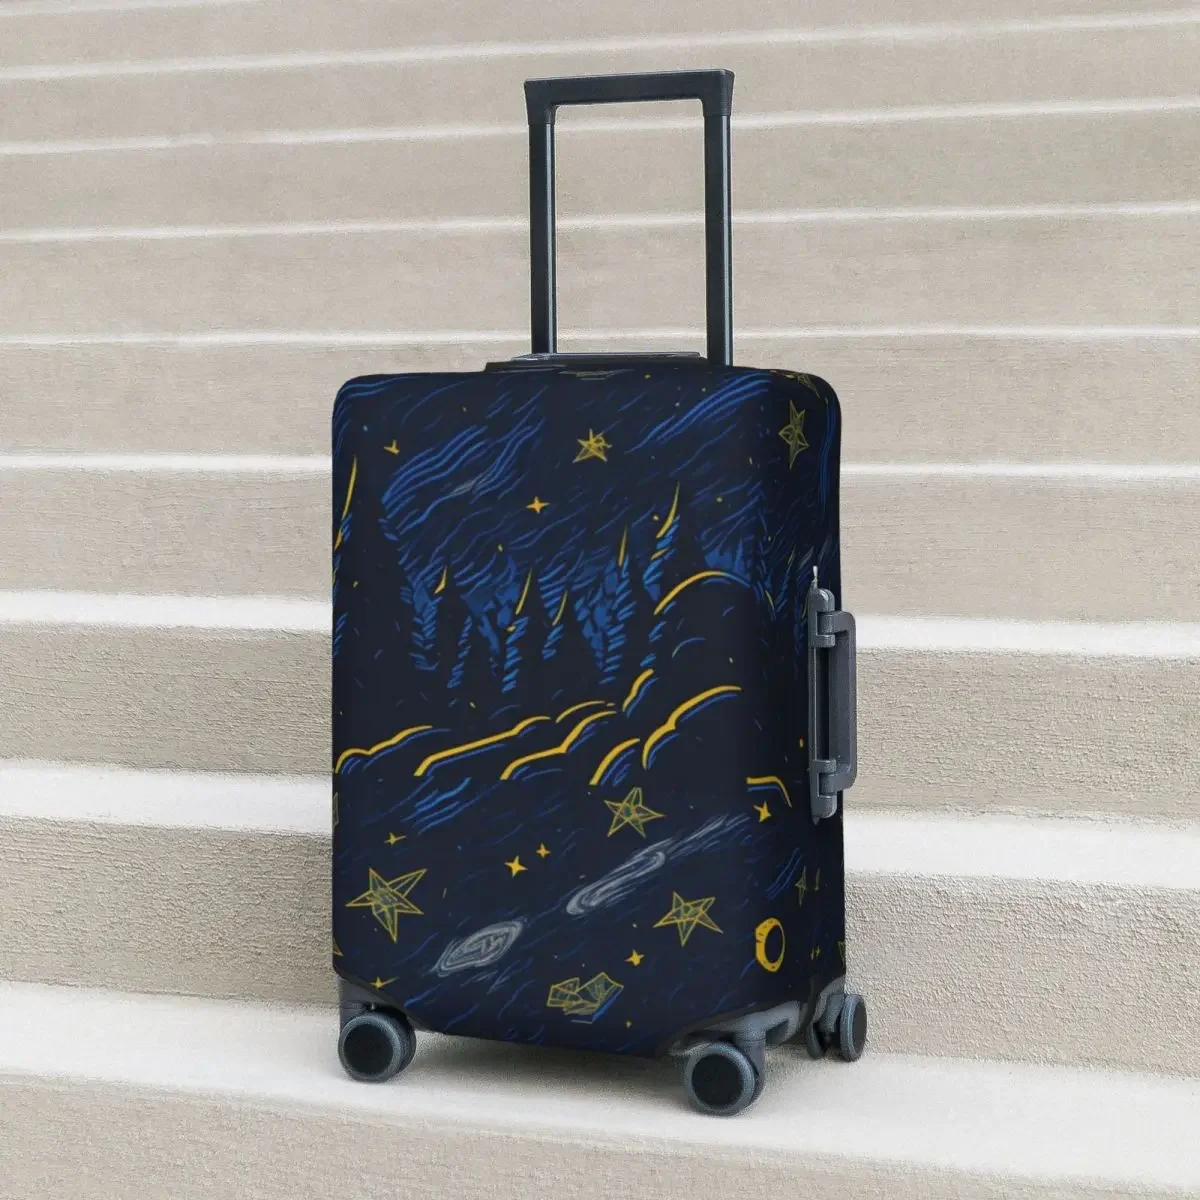 

Forest Starry Suitcase Cover Night Sky Illustration Stars Nature Practical Travel Protector Luggage Supplies Holiday